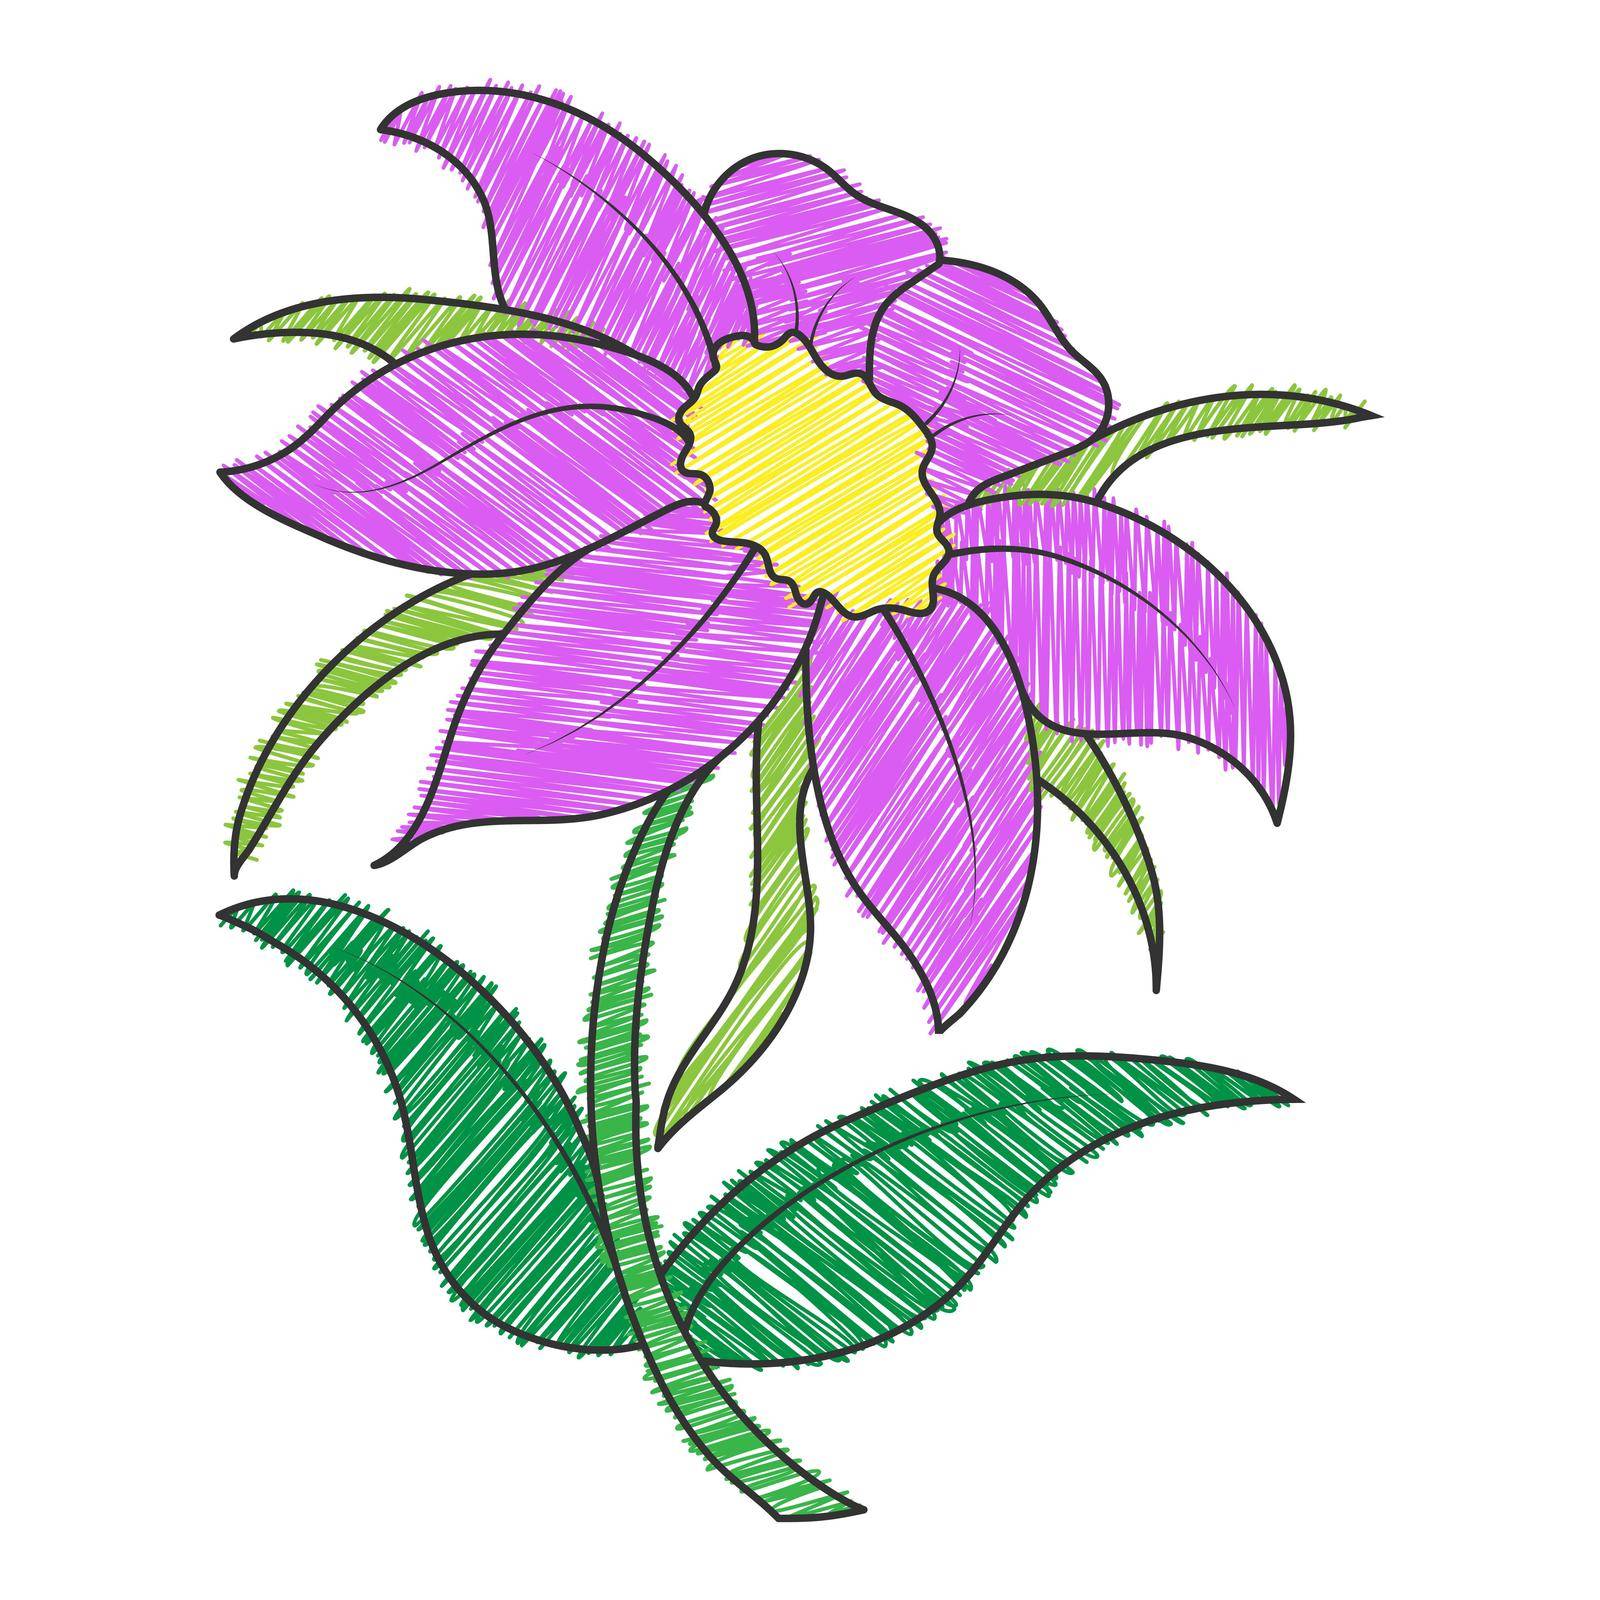 Empty colored outline of a flower with petals. Doodle style outline isolated on white background. Flat design for coloring, cards, scrapbooking and decoration.